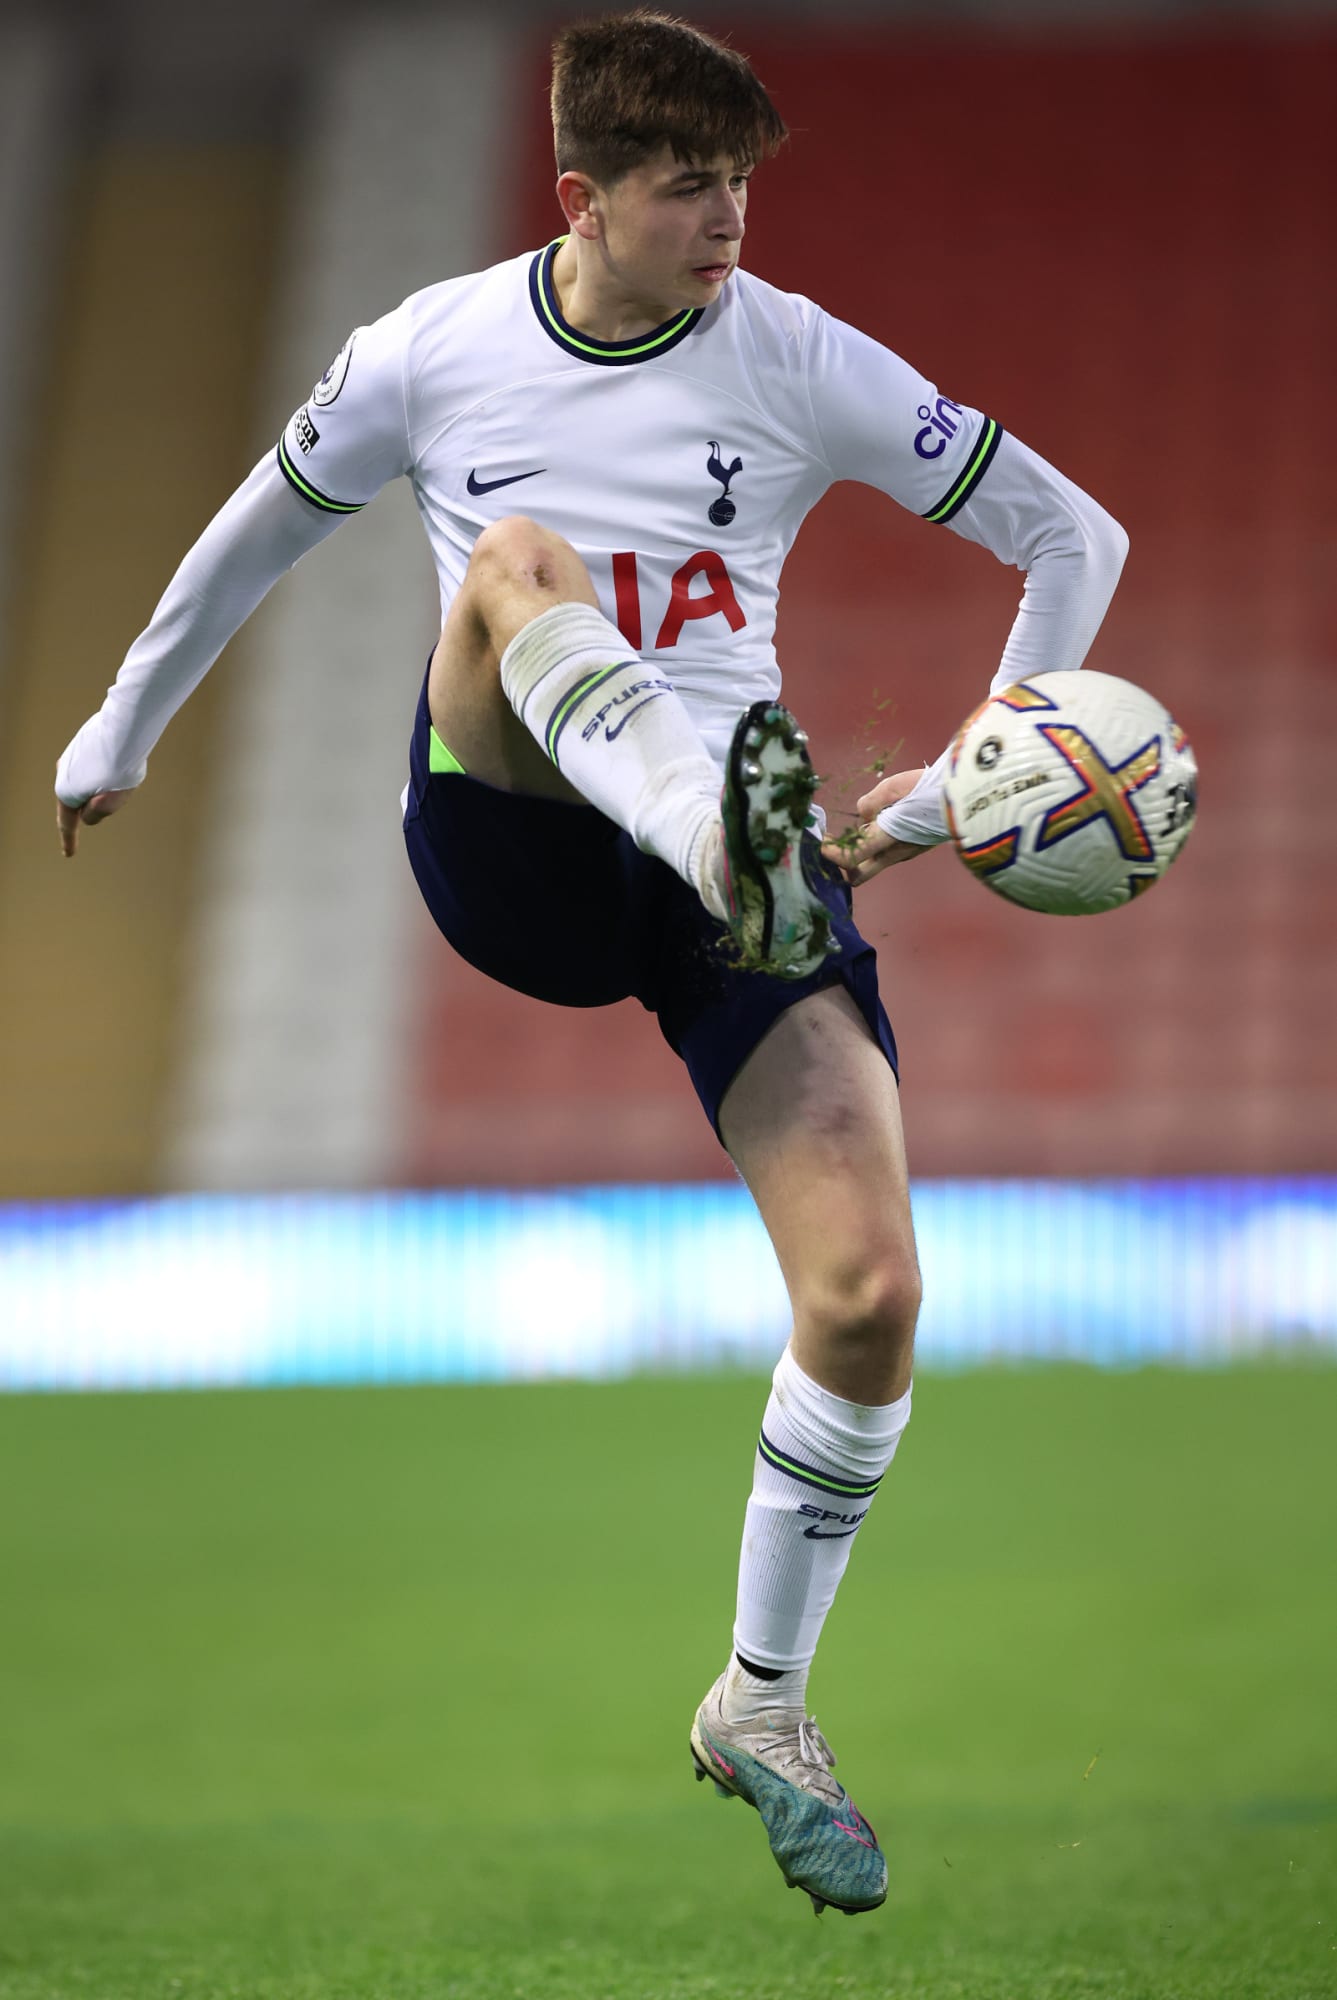 Incredible Spurs youth player Mikey Moore could be a future star